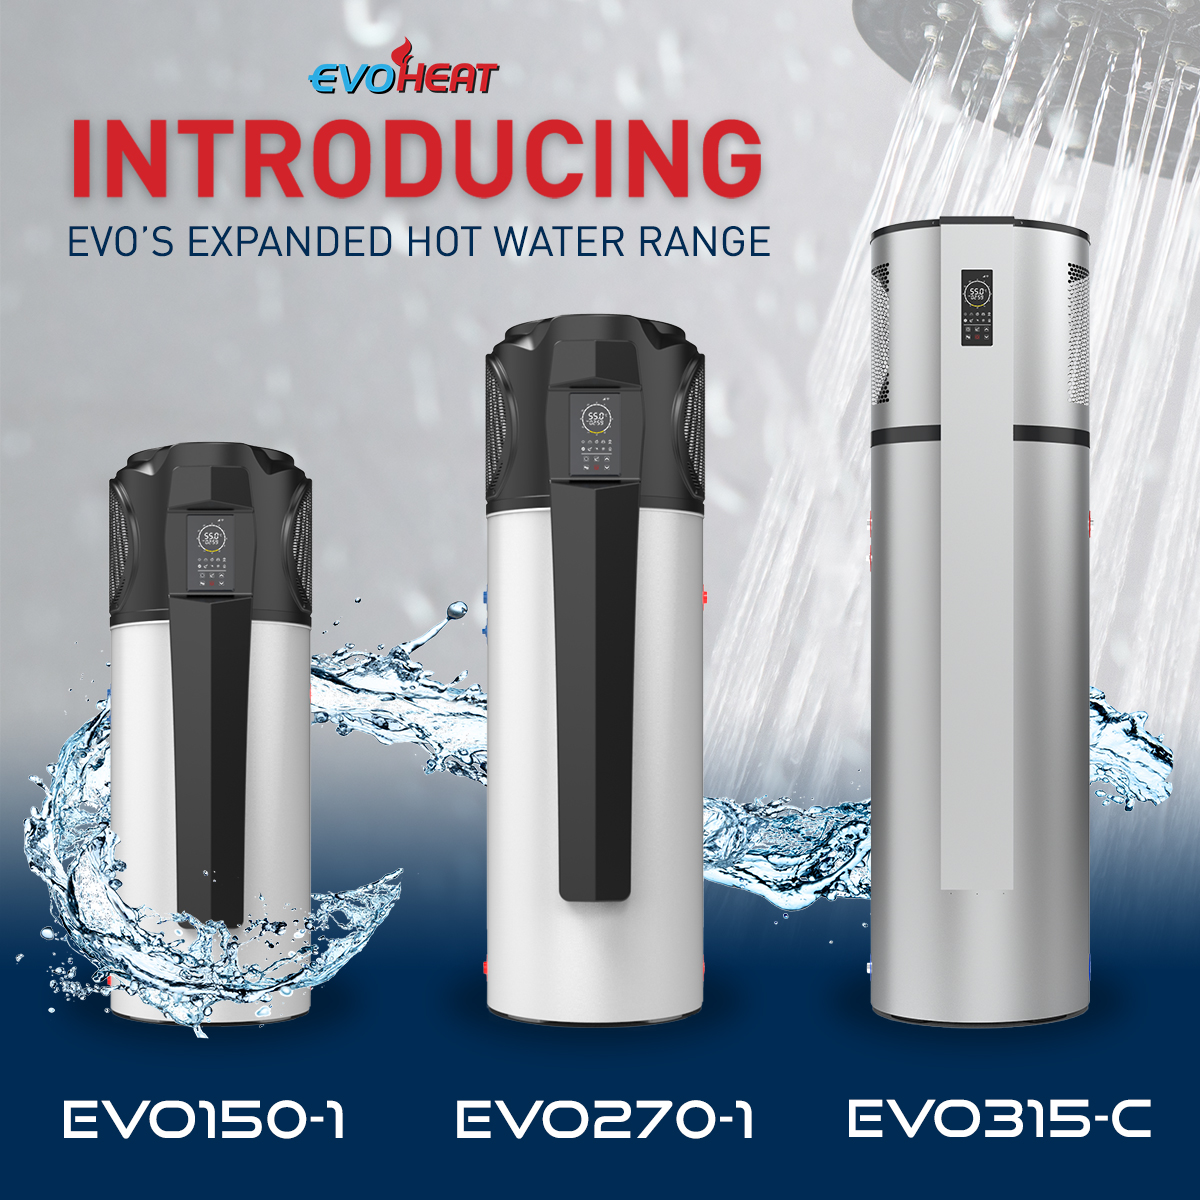 Hot Water Products